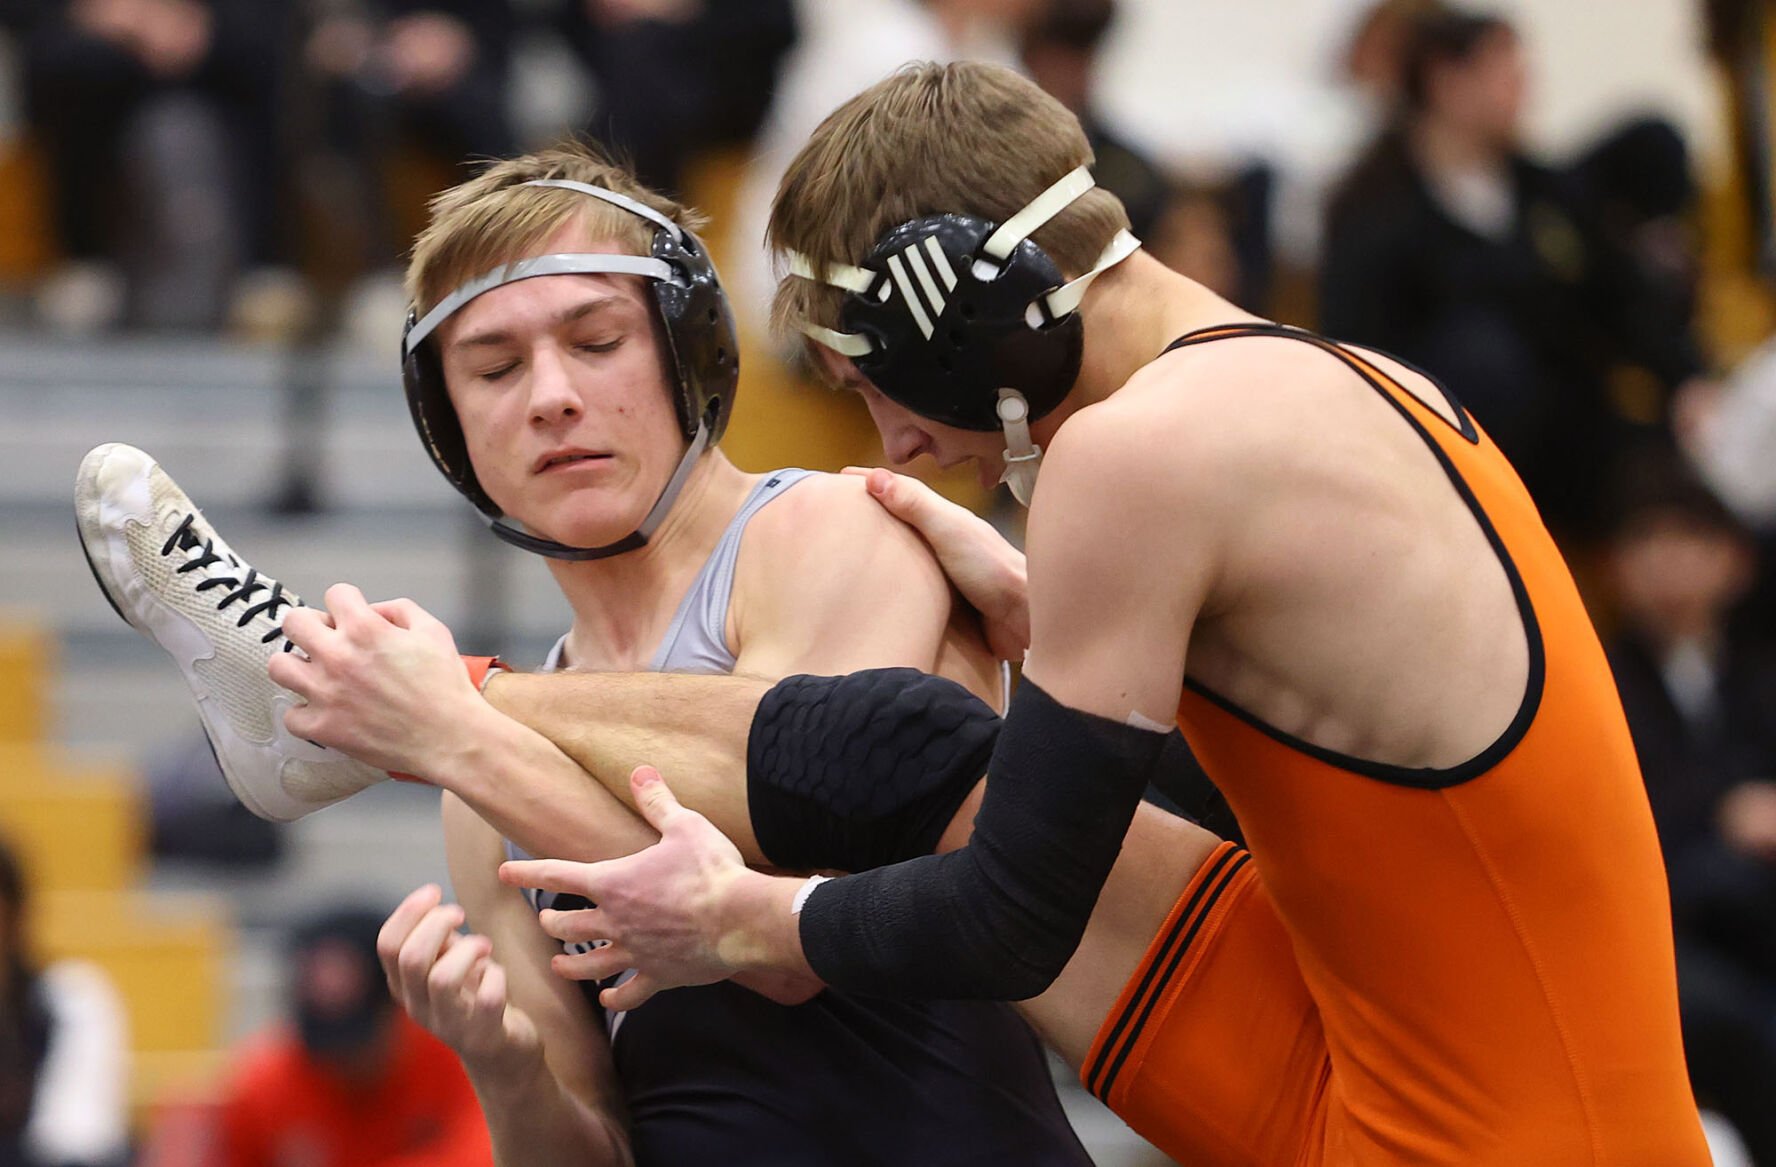 Tye Linser's Journey to the Indiana High School Wrestling State Finals